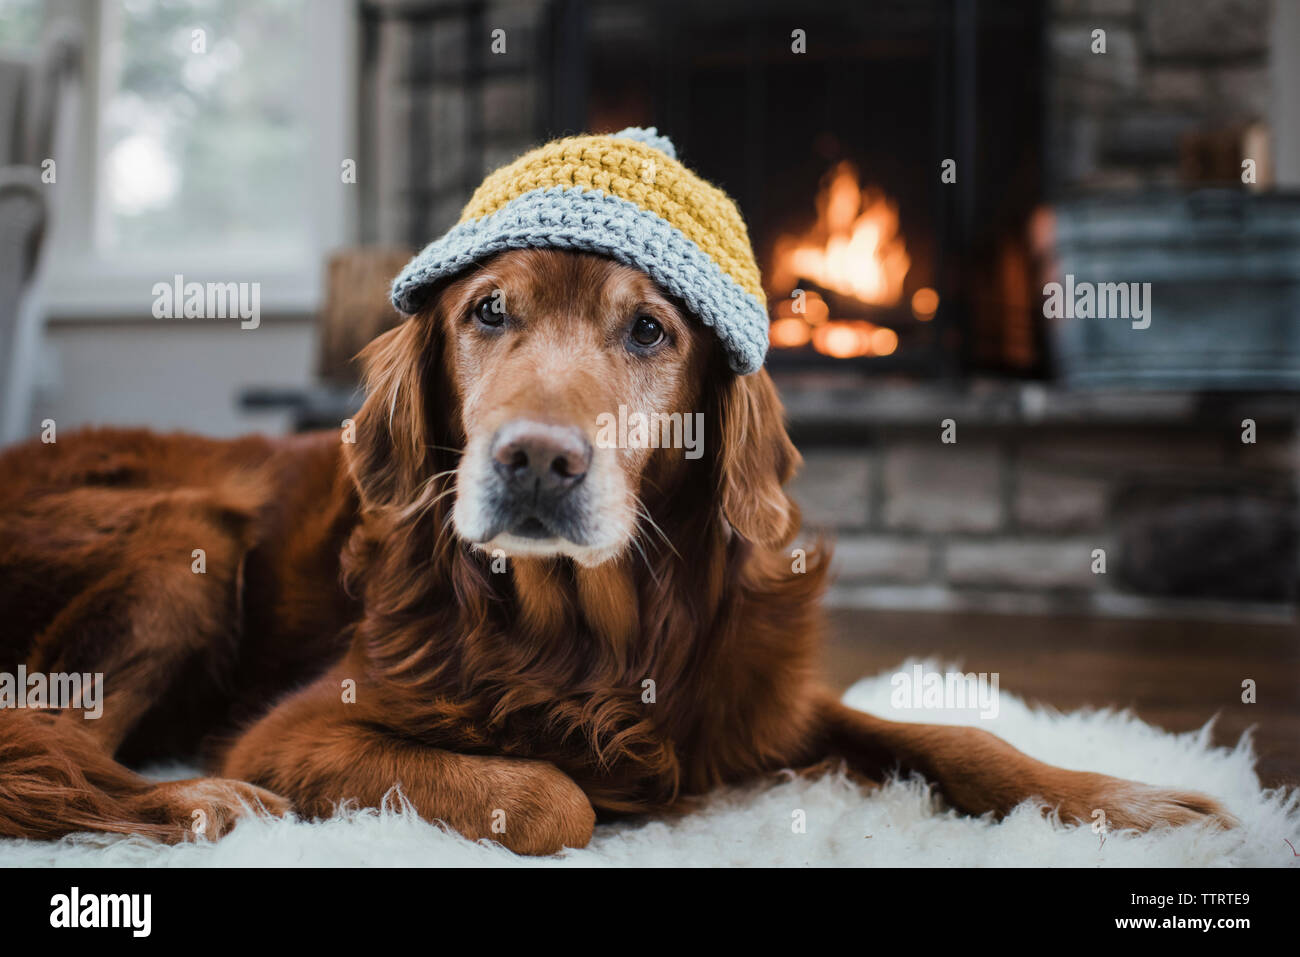 Close-up of golden retriever avec Knit hat lying on rug Banque D'Images